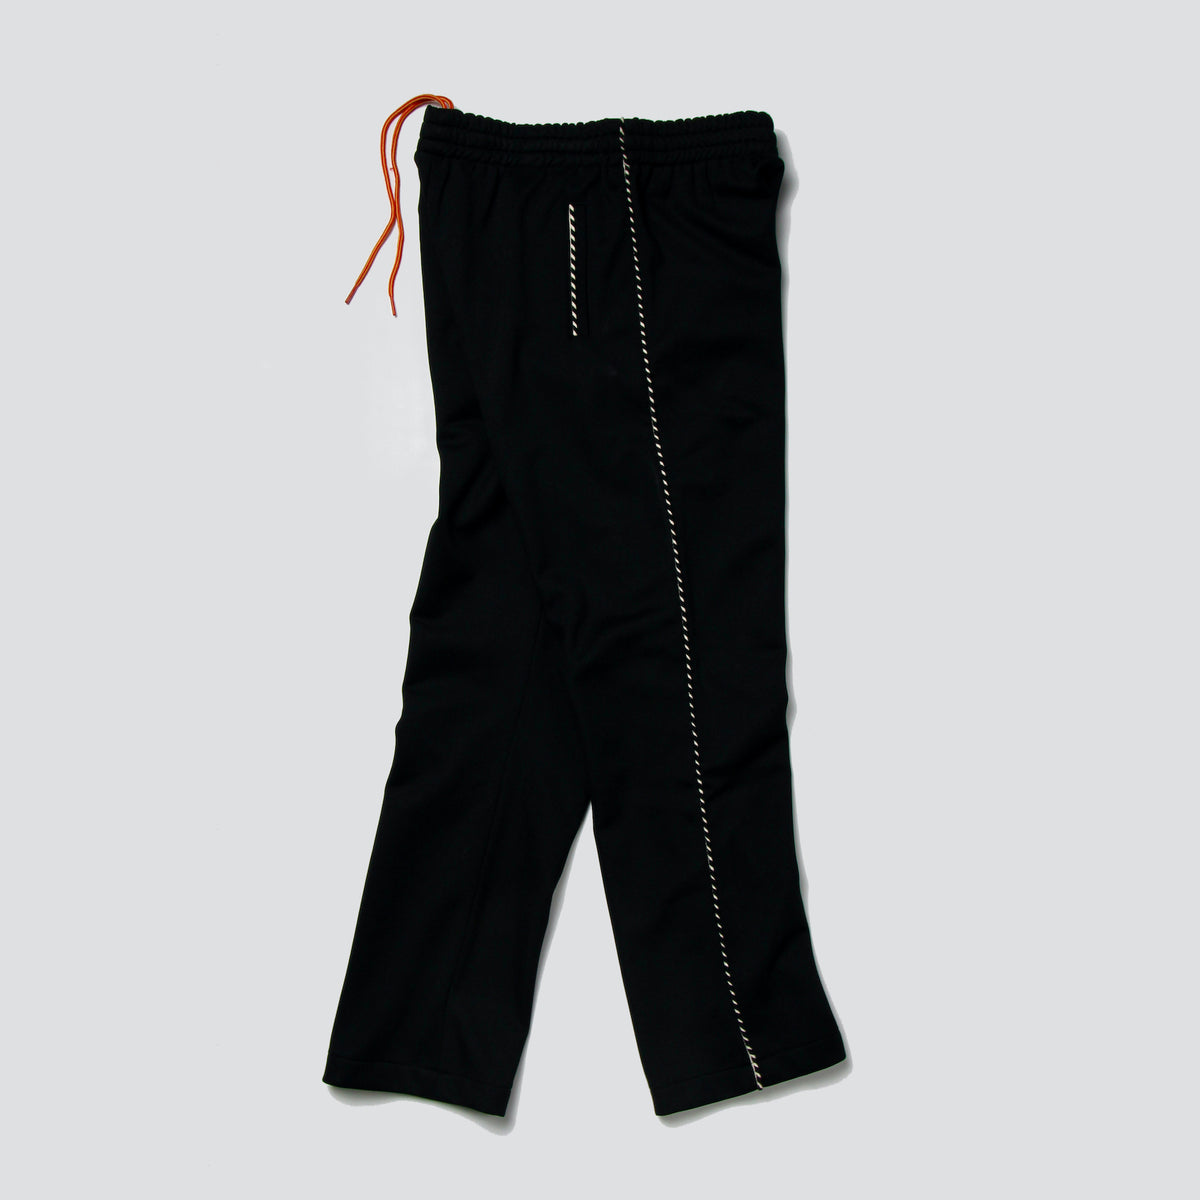 For The Homies Track Pants - Black (Exclusive)